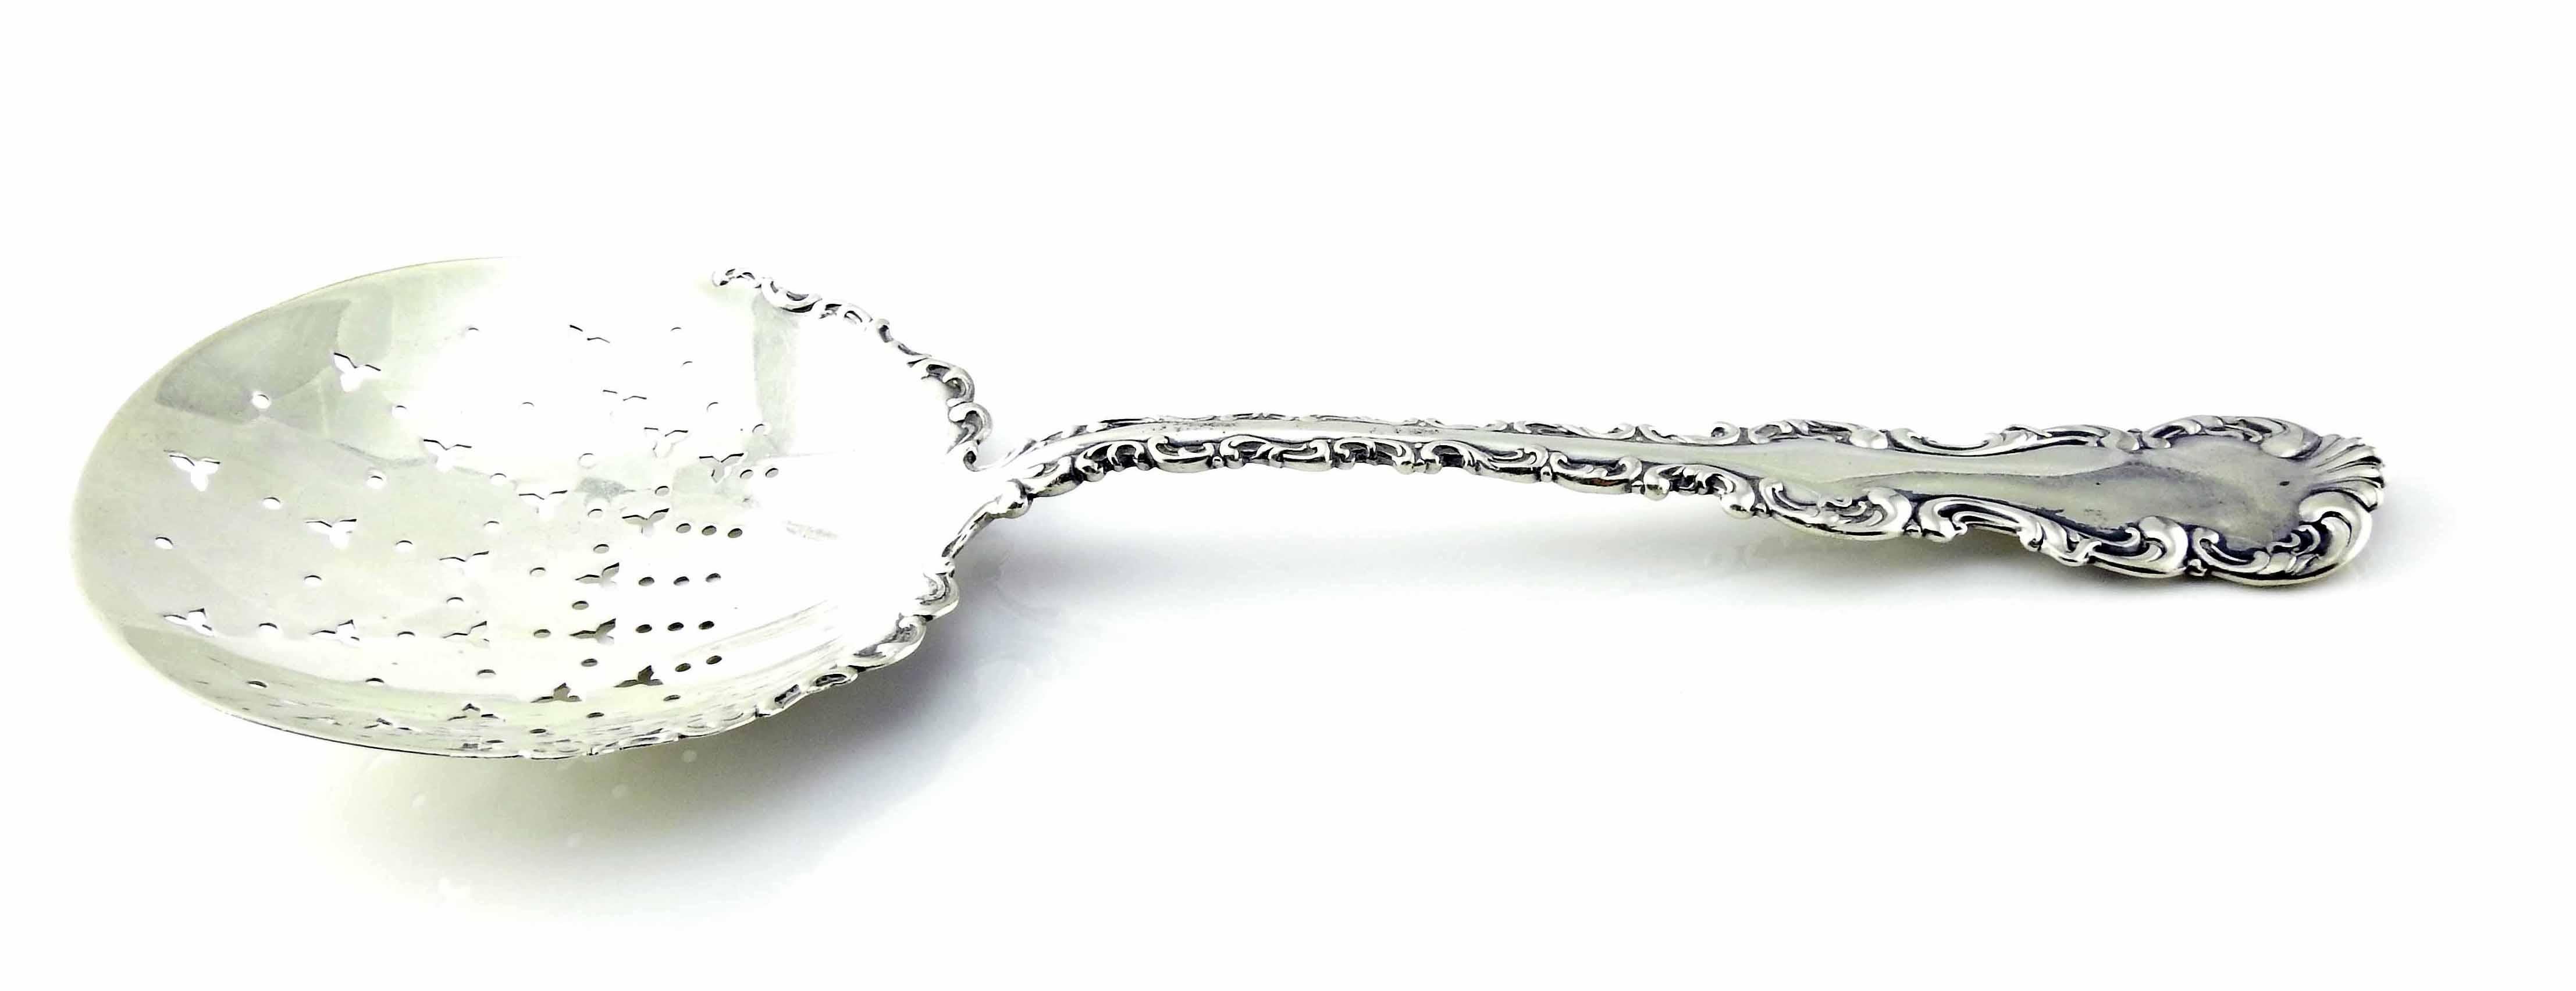 Whiting Manufacturing Co Sterl Silver Louis XV Pierced Pea Serving Spoon #4388 For Sale 5